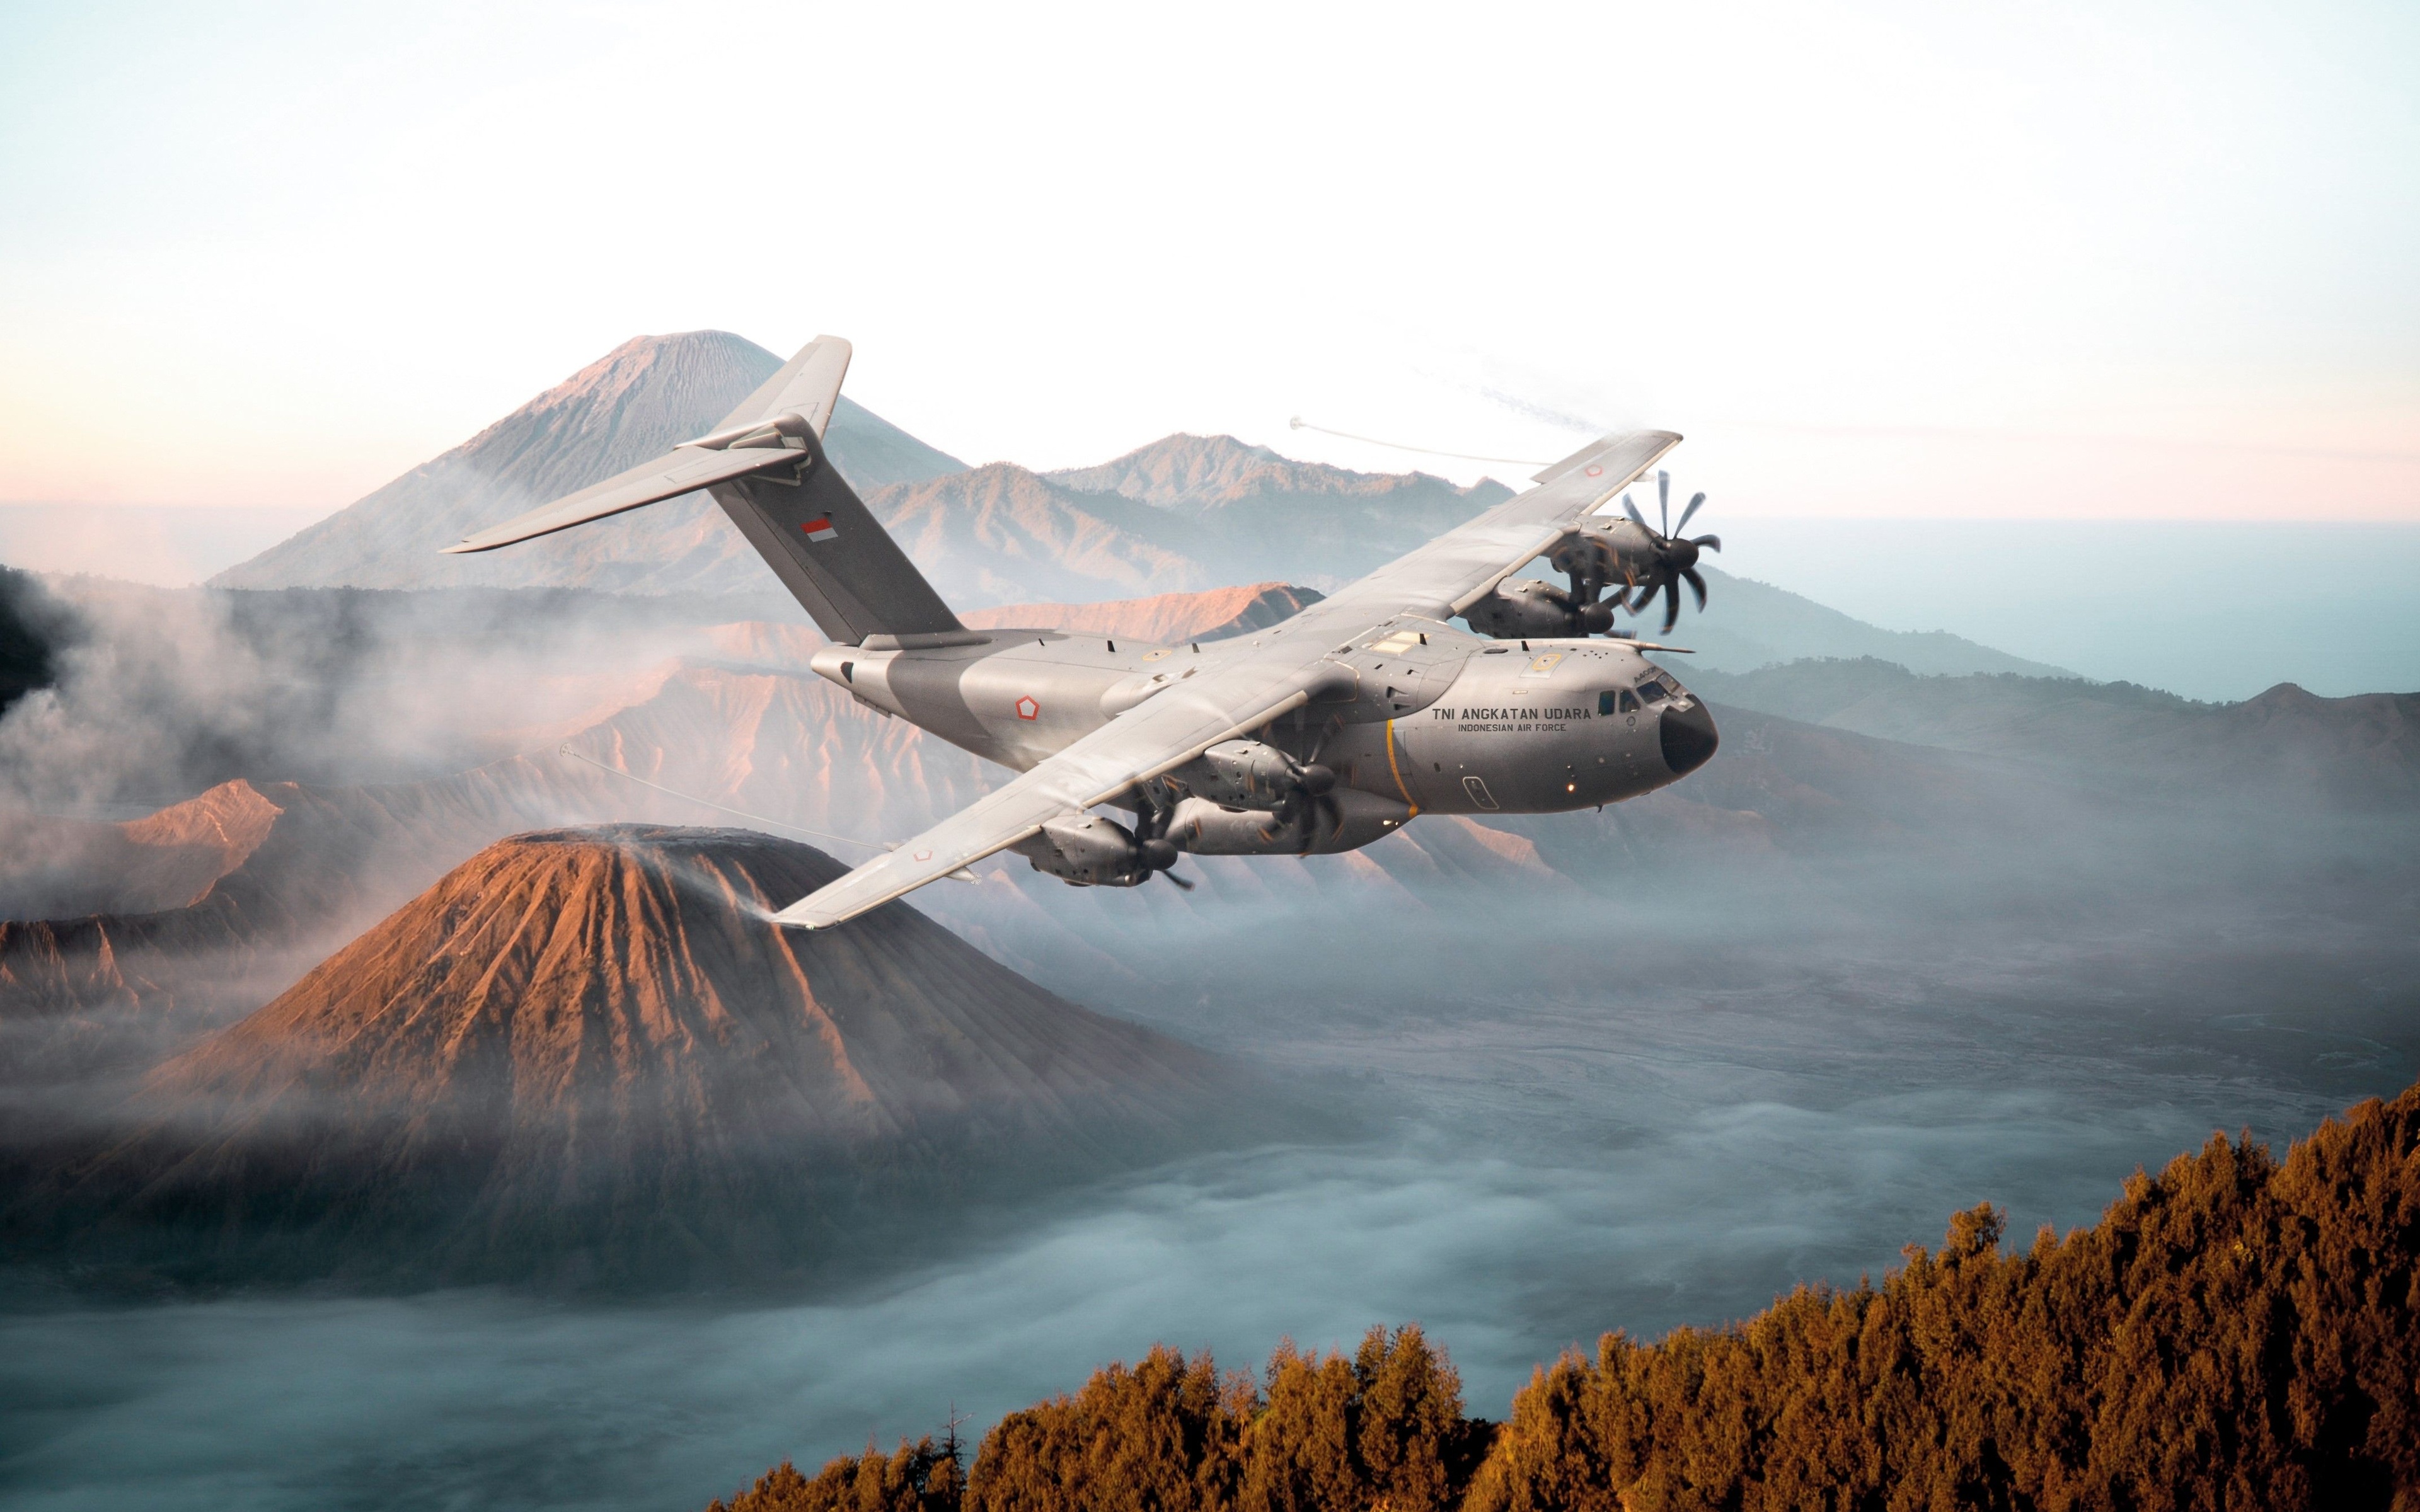 General 3840x2400 Indonesian Air Force vehicle military military vehicle aircraft military aircraft landscape mountains Indonesia Airbus A400M Atlas